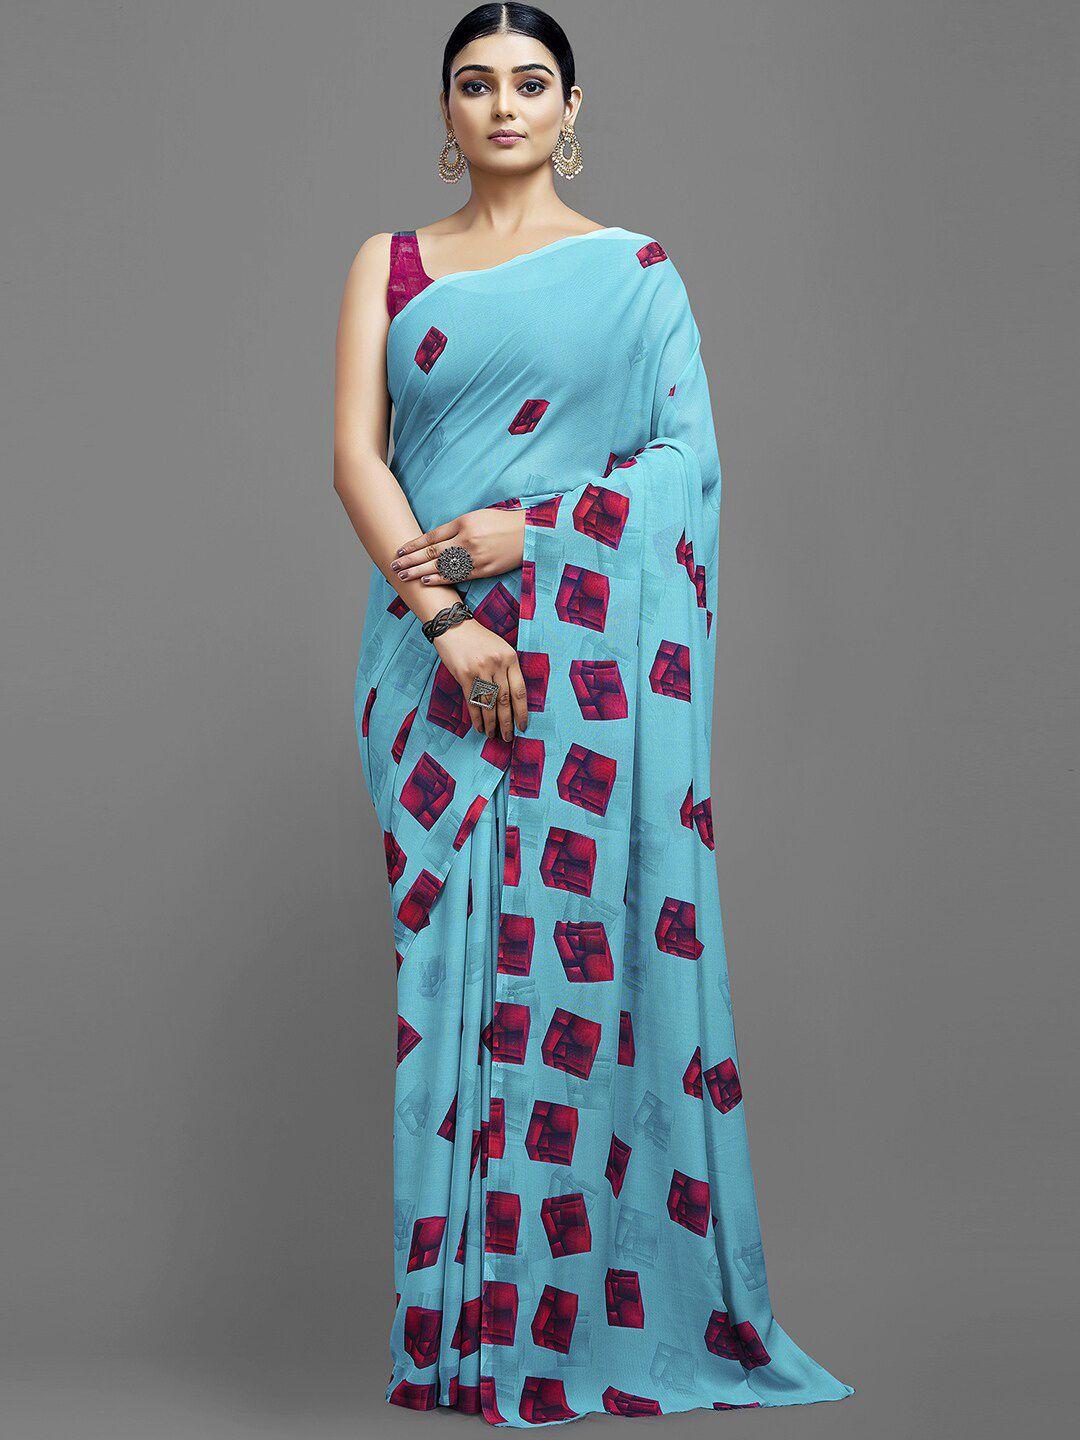 shaily turquoise blue & red poly georgette saree